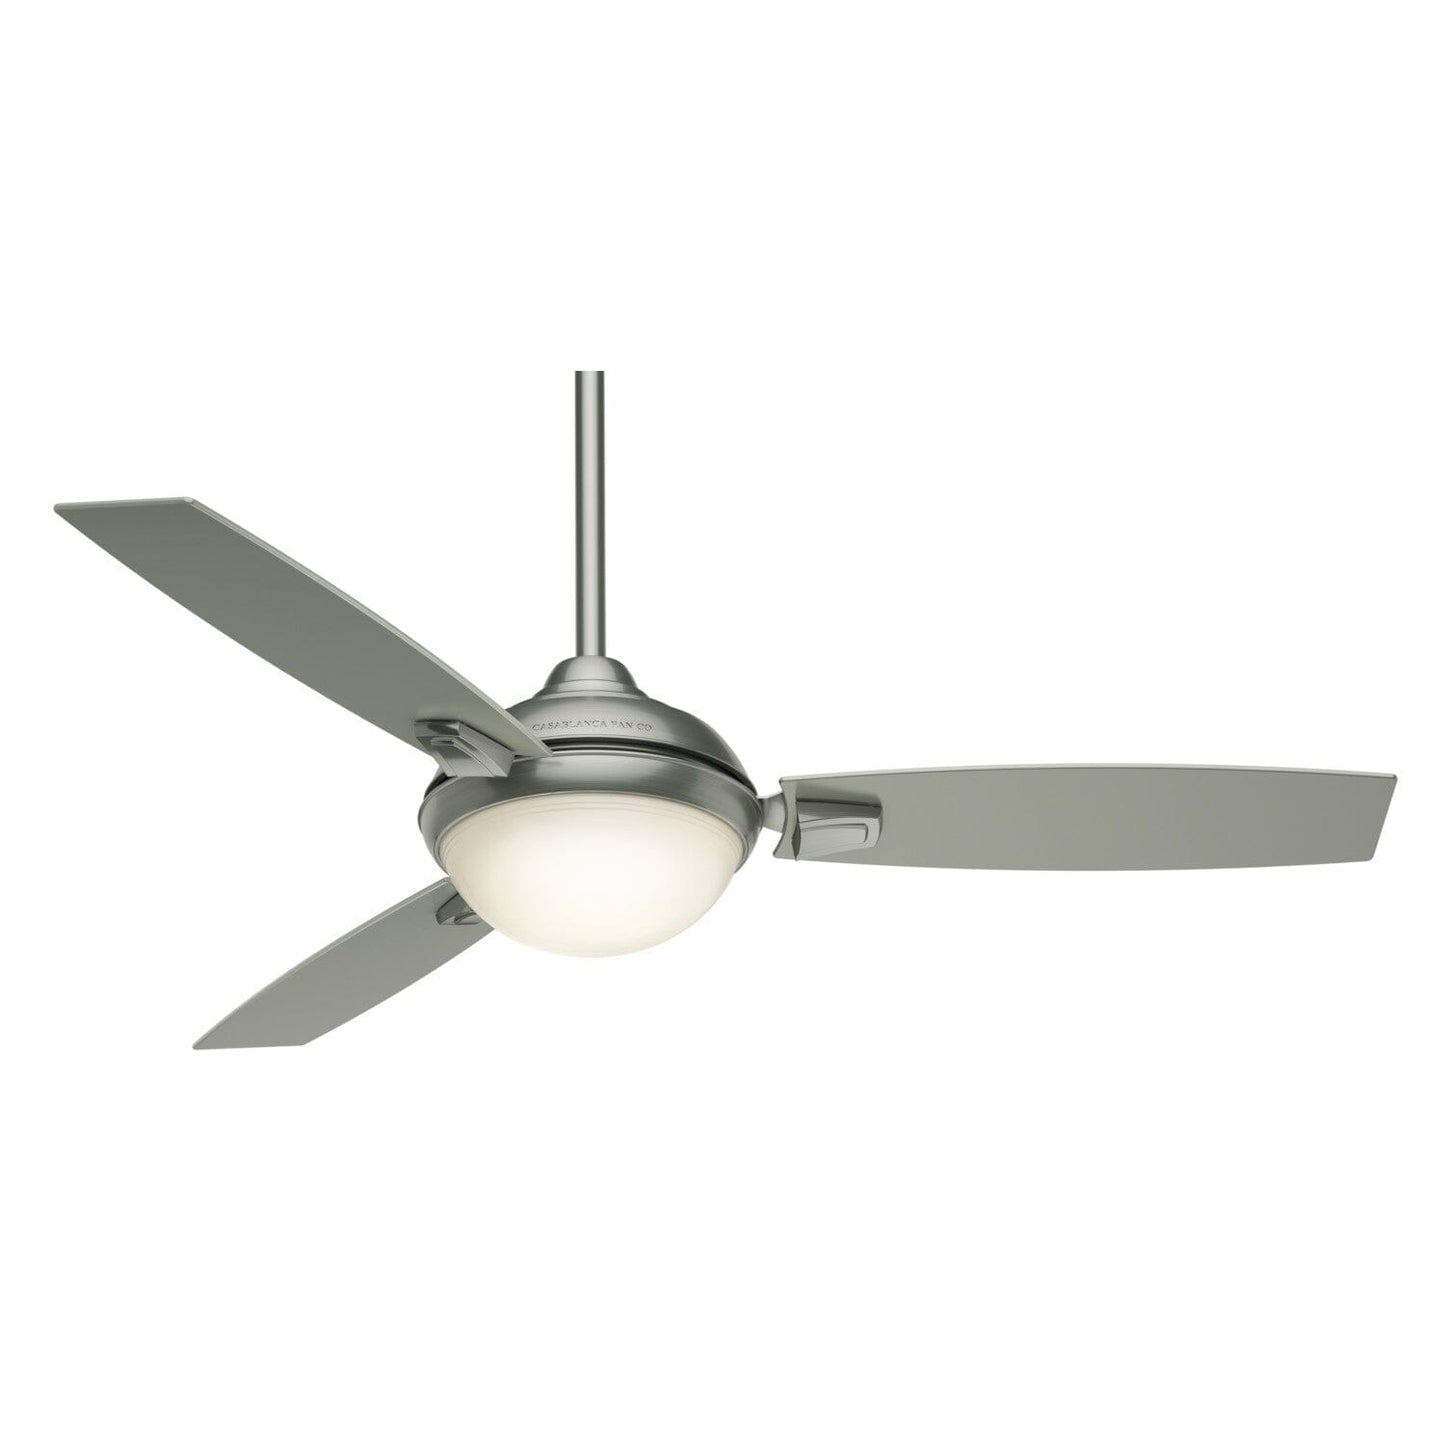 Verse Outdoor with LED Light and Remote Control 54 inch Ceiling Fans Casablanca Brushed Nickel - Black Mahogany 